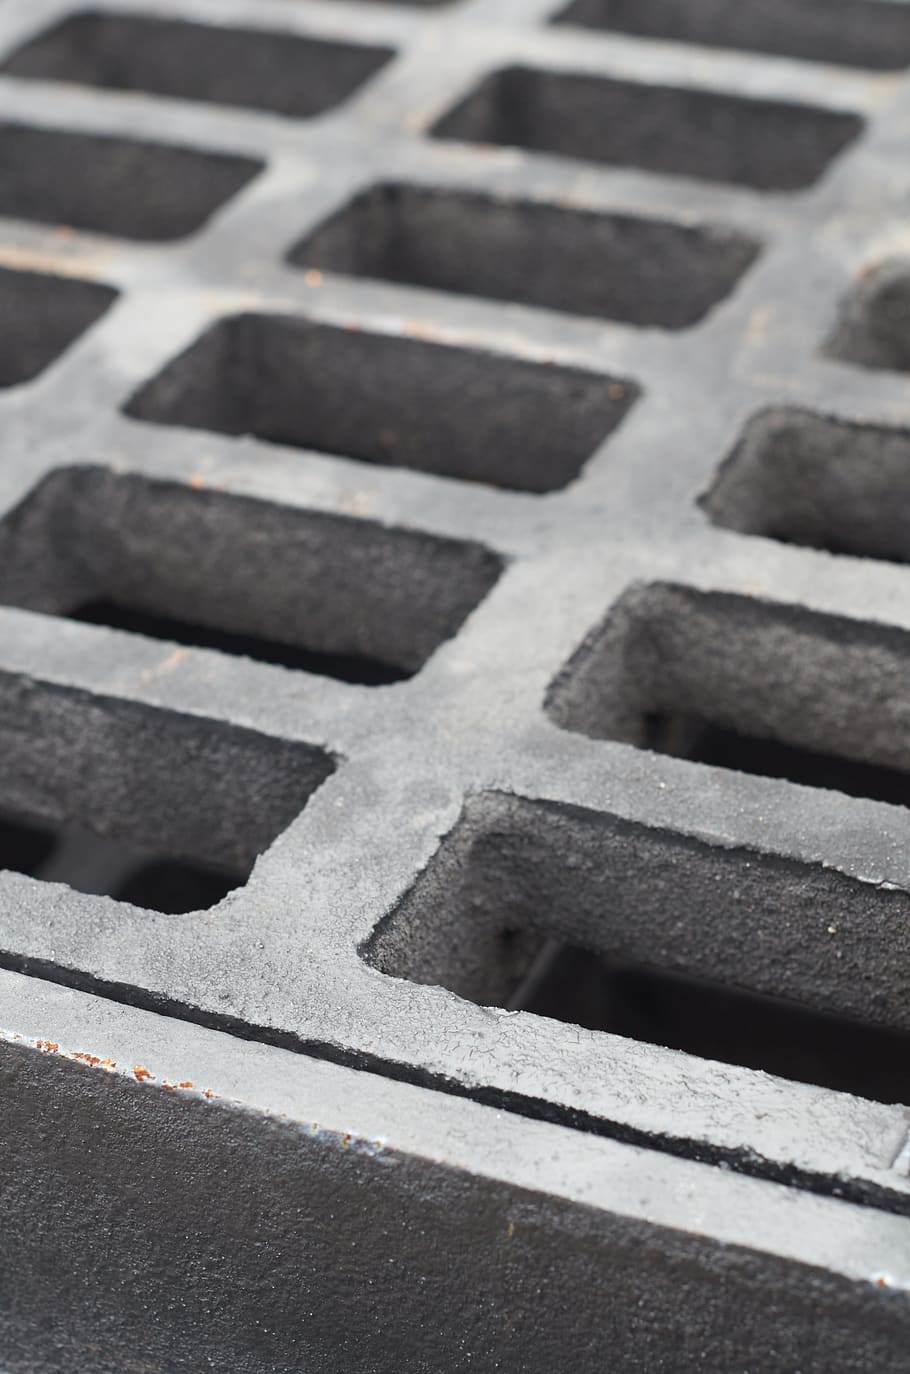 water, grate, iron, abstract, cover, drain, background, design, detail, grid